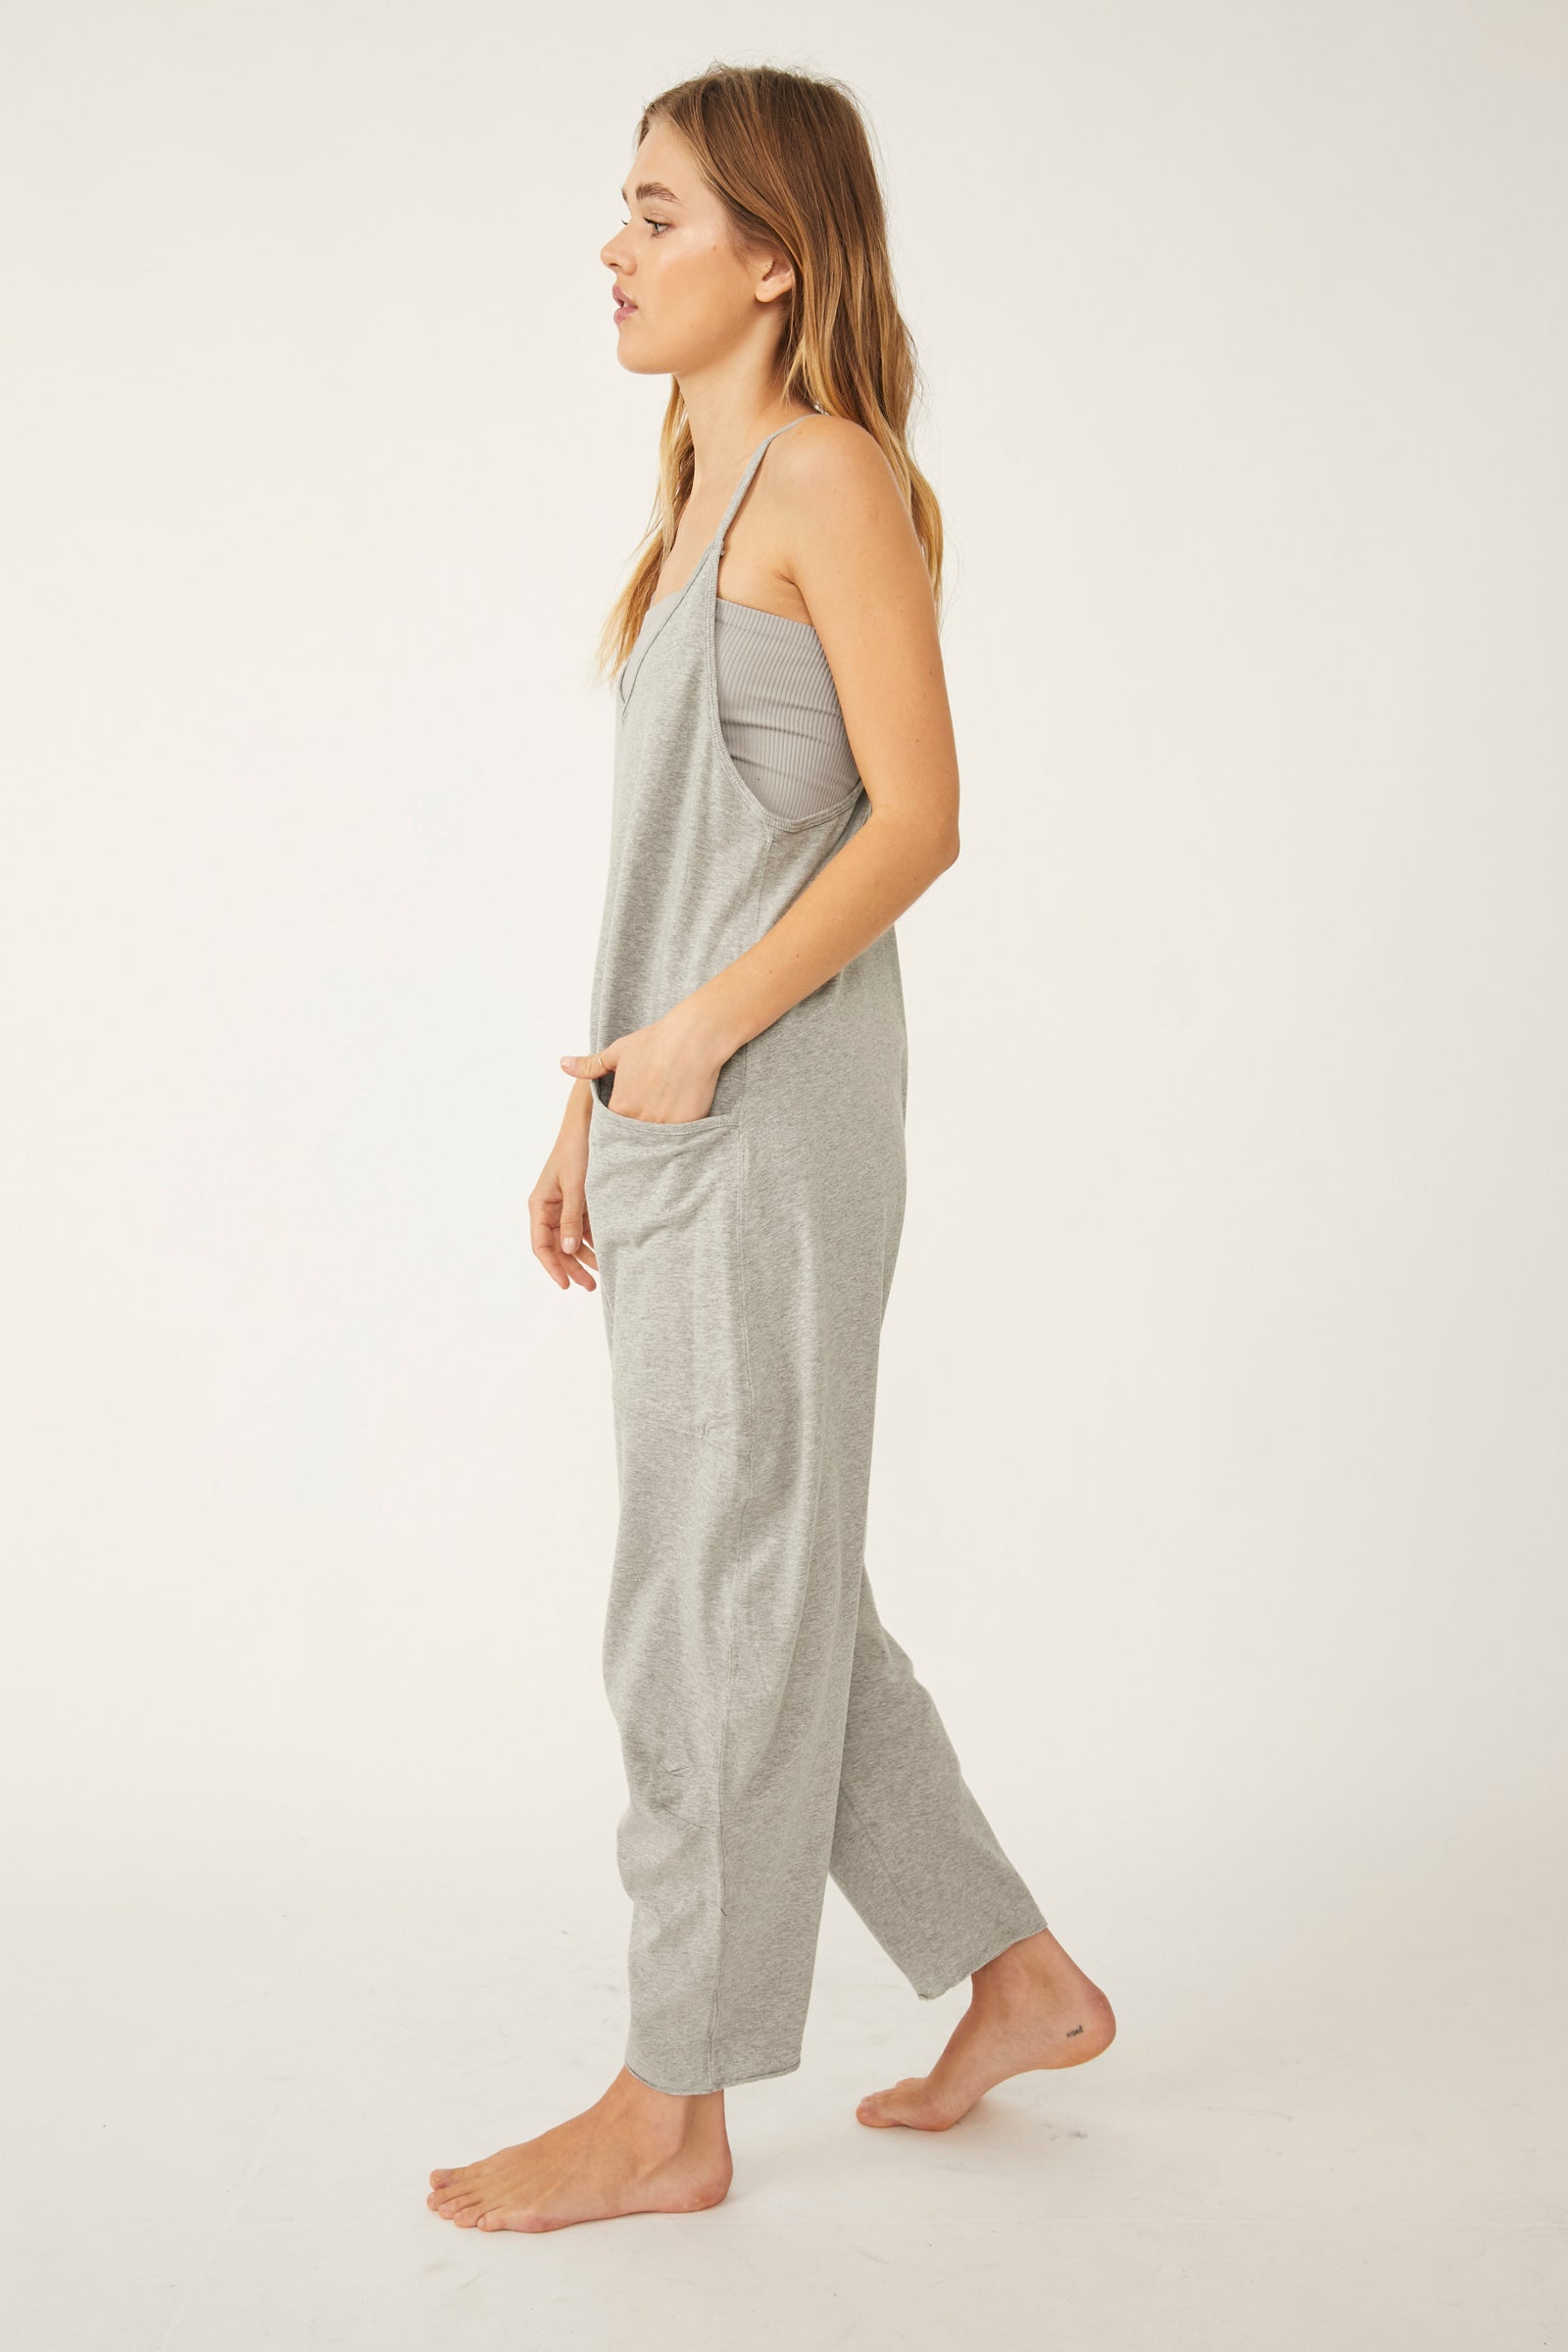 FREE PEOPLE MOVEMENT HOT SHOT ONESIE - HEATHER GREY 9677 – Work It Out